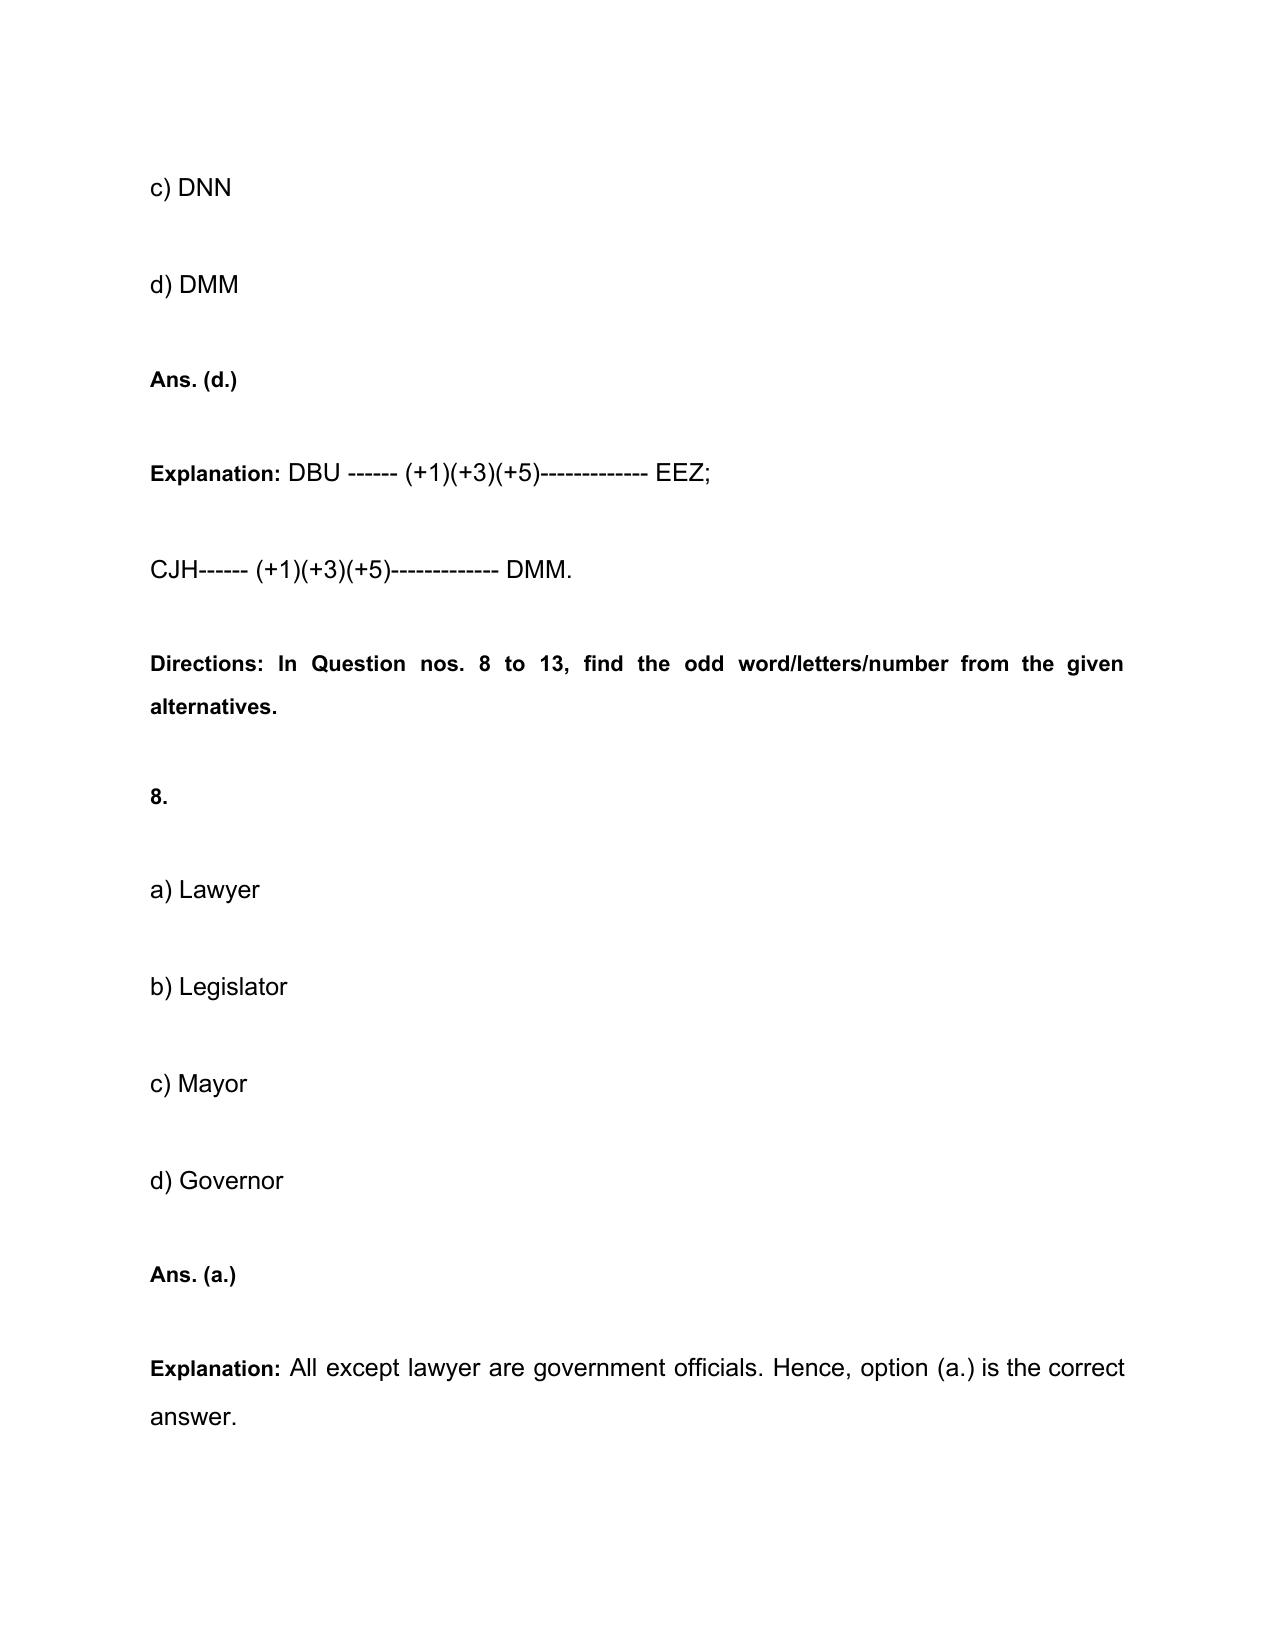 HSSC Salesman Reasoning / General Intelligence Question Papers - Page 6